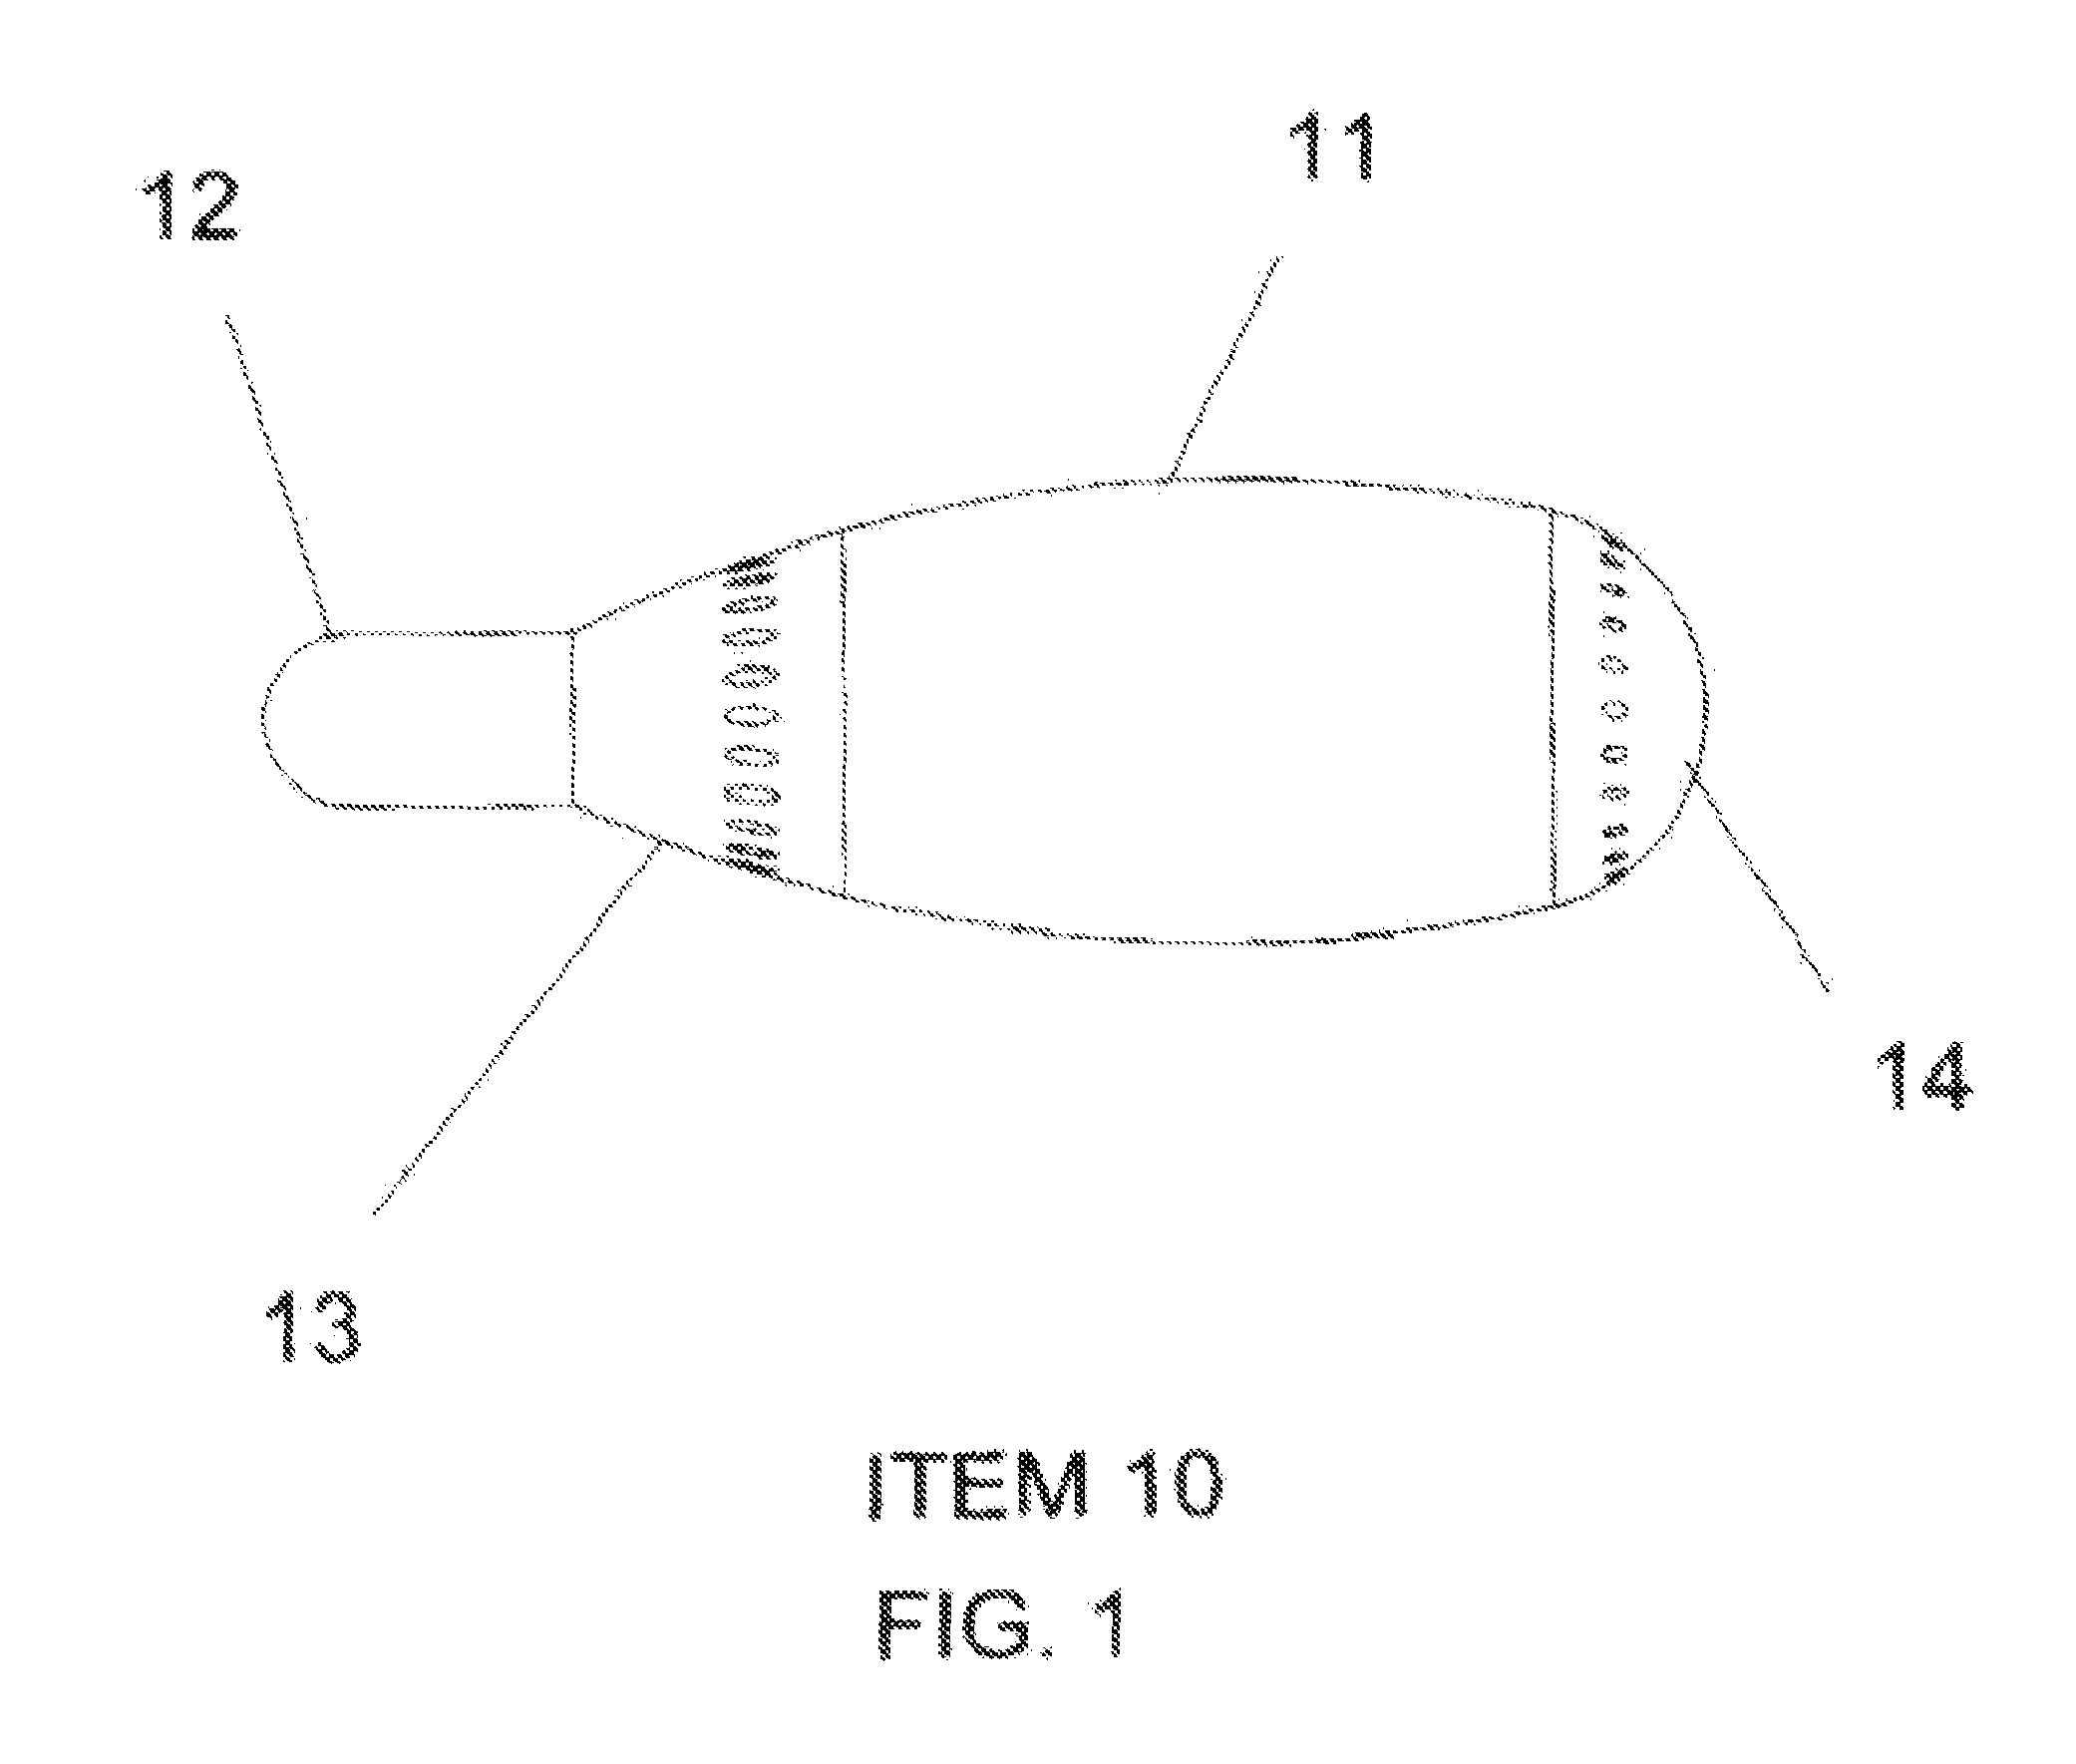 Method and apparatus for permanent and safe disposal of radioactive waste